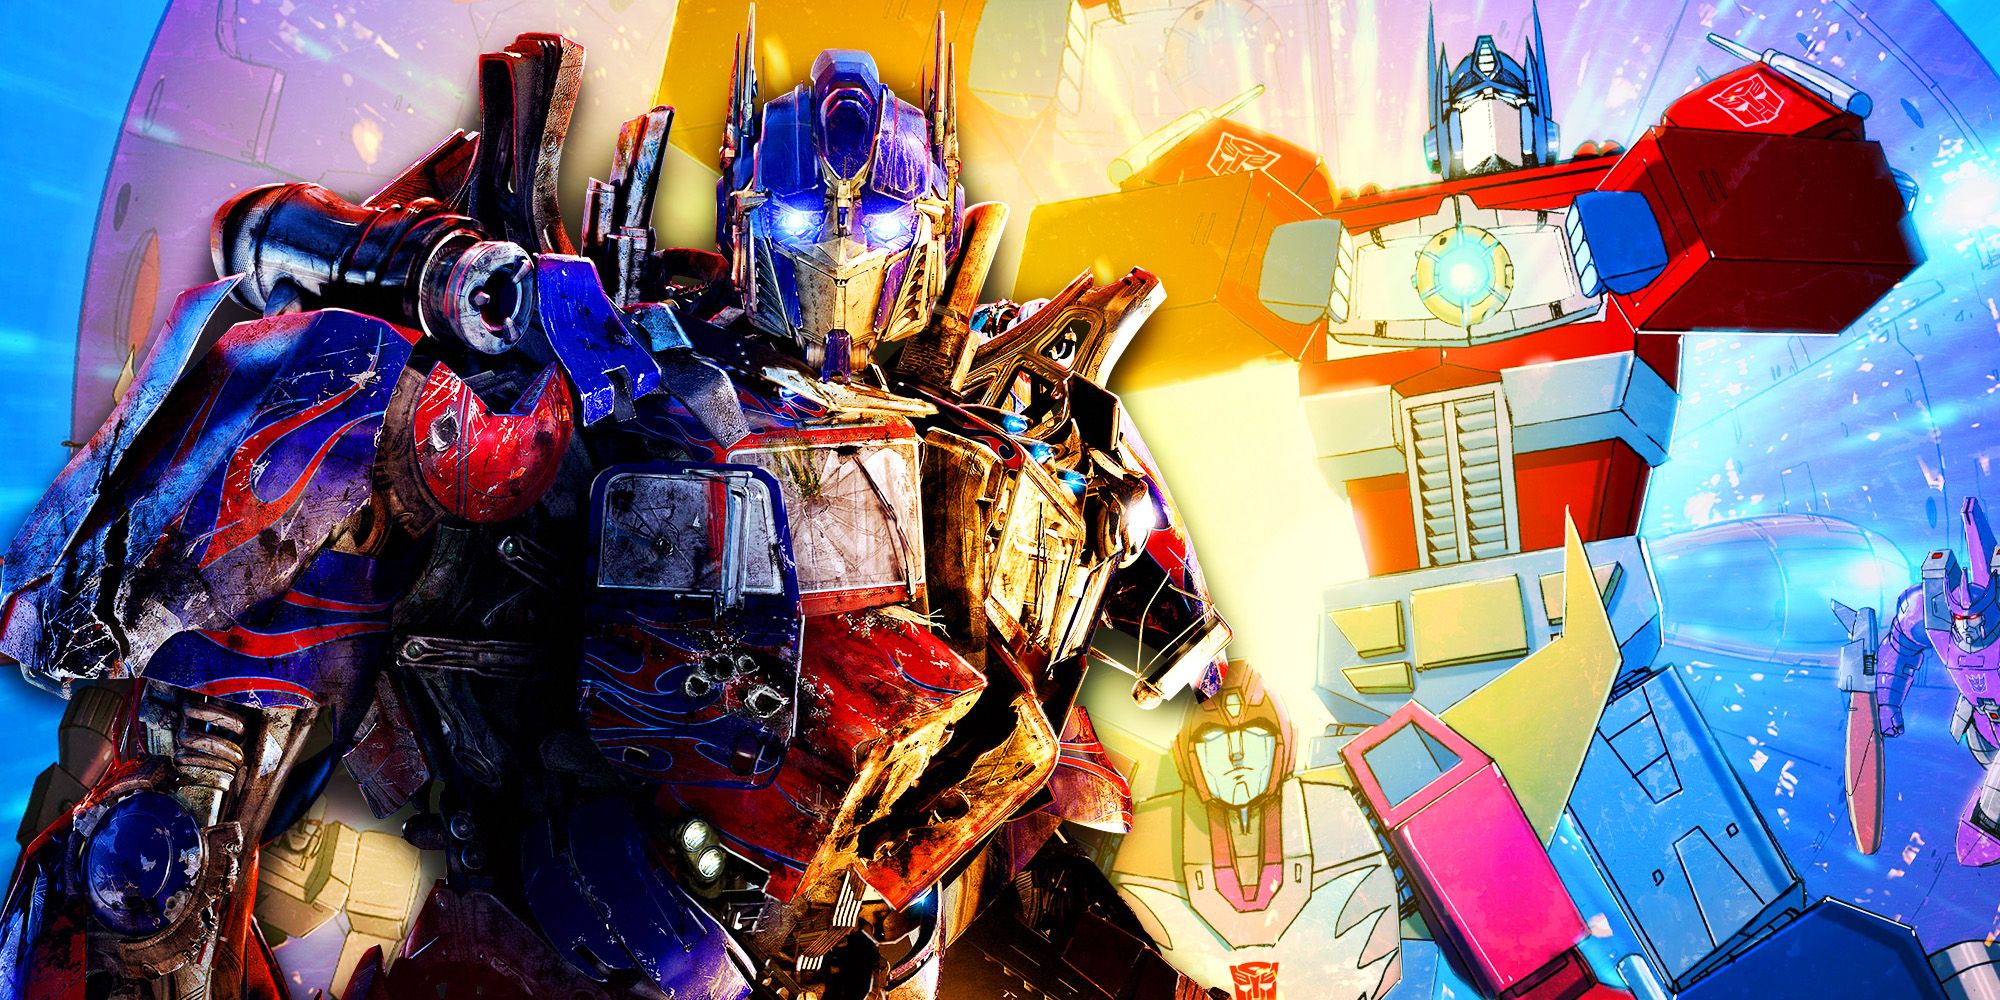 Optimus Prime and Transformers The Movie.